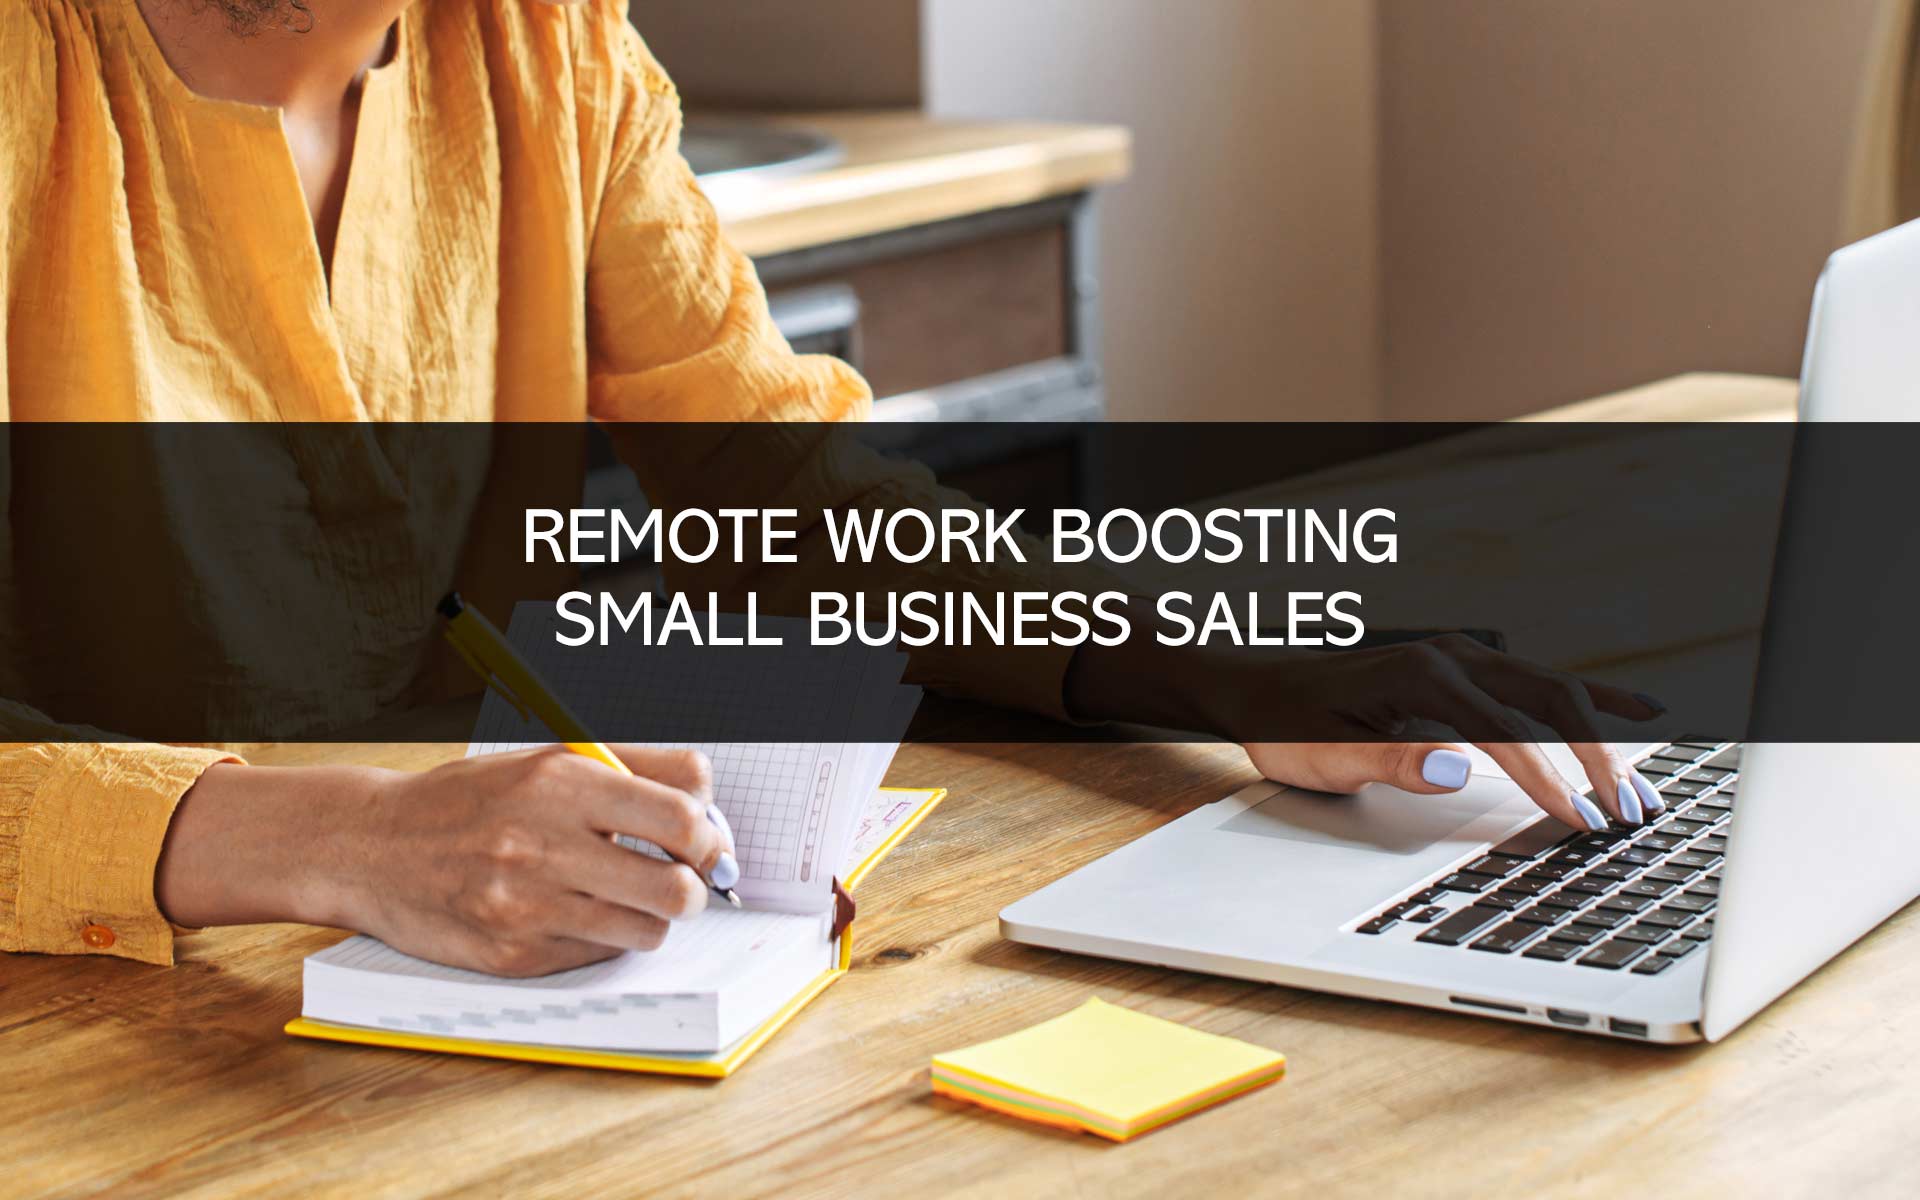 Remote Work Boosting Small Business Sales